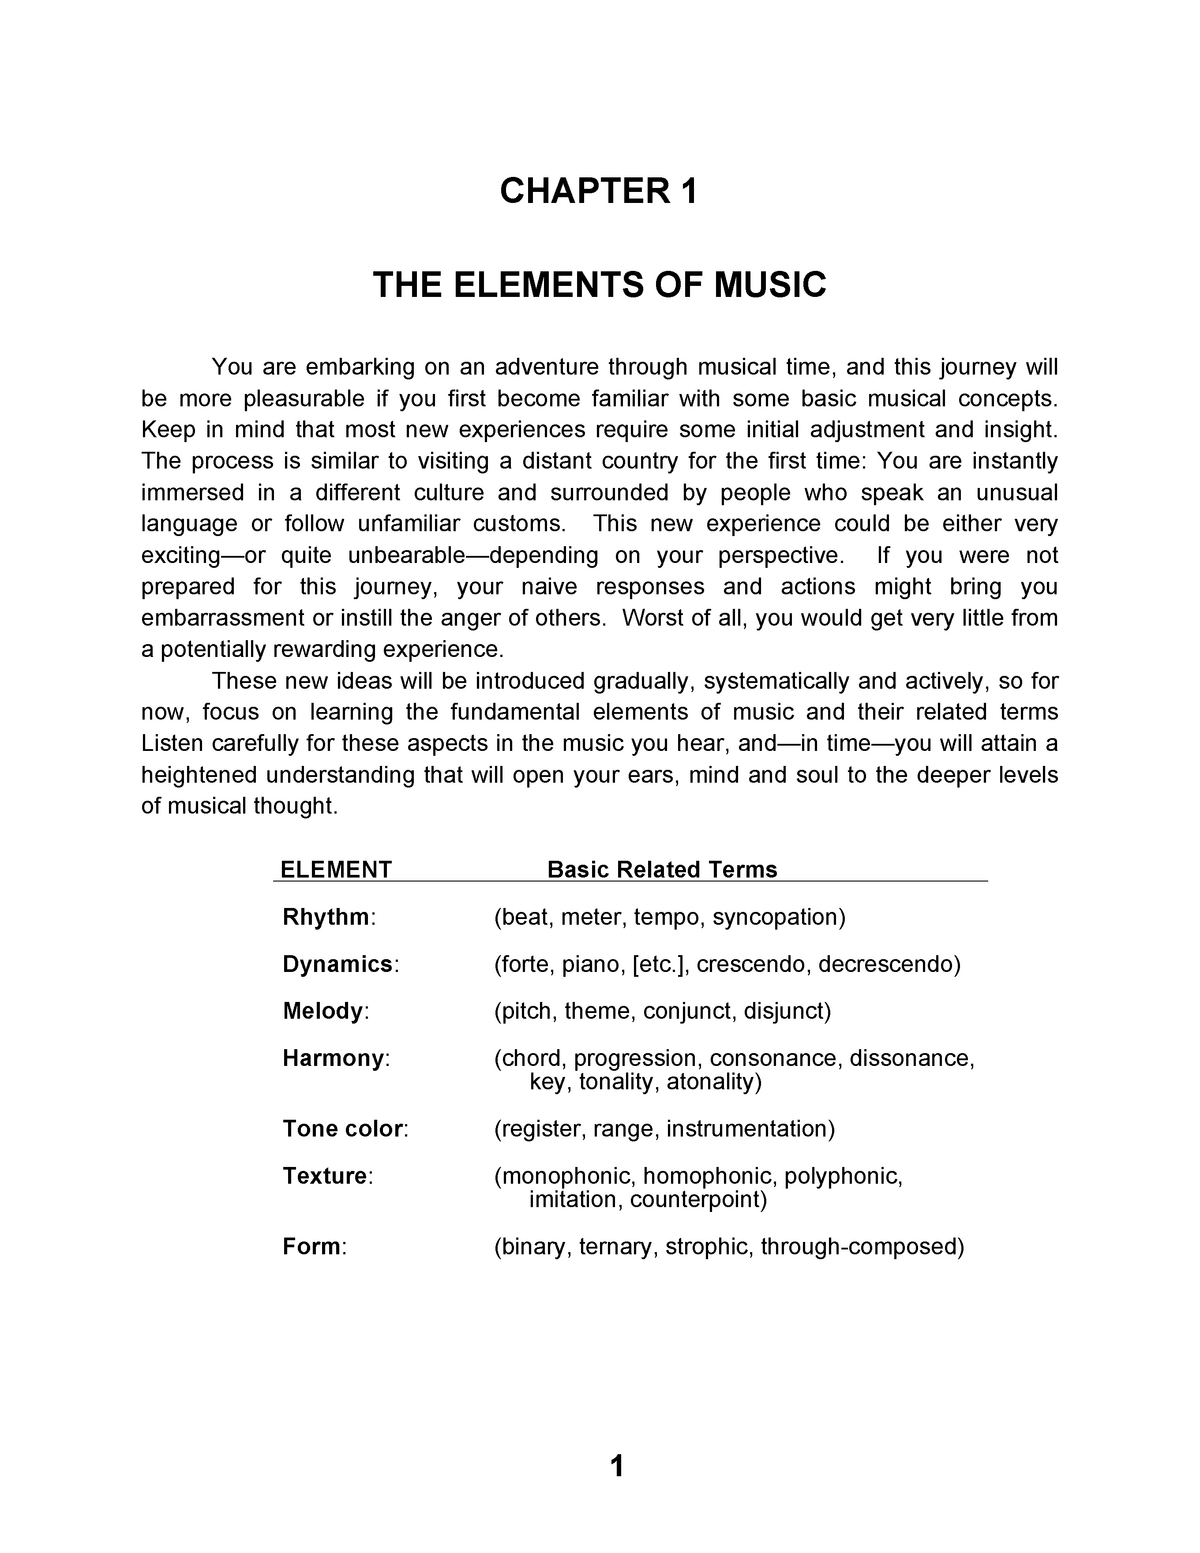 elements-of-music-chapter-1-the-elements-of-music-you-are-embarking